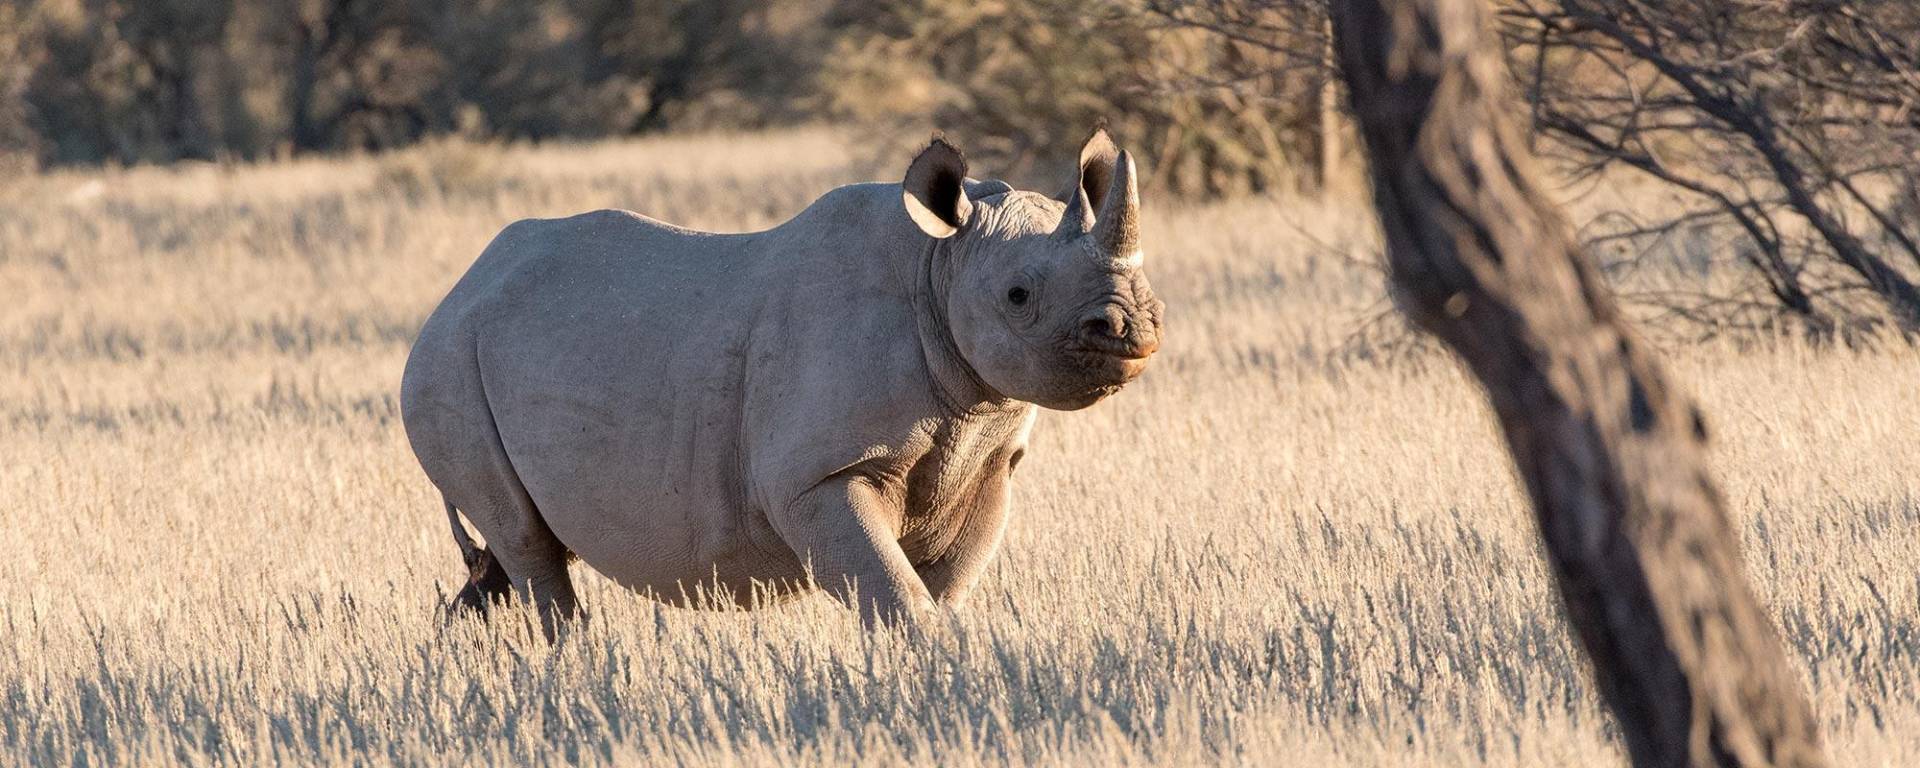 Rhino Conservation in Namibia